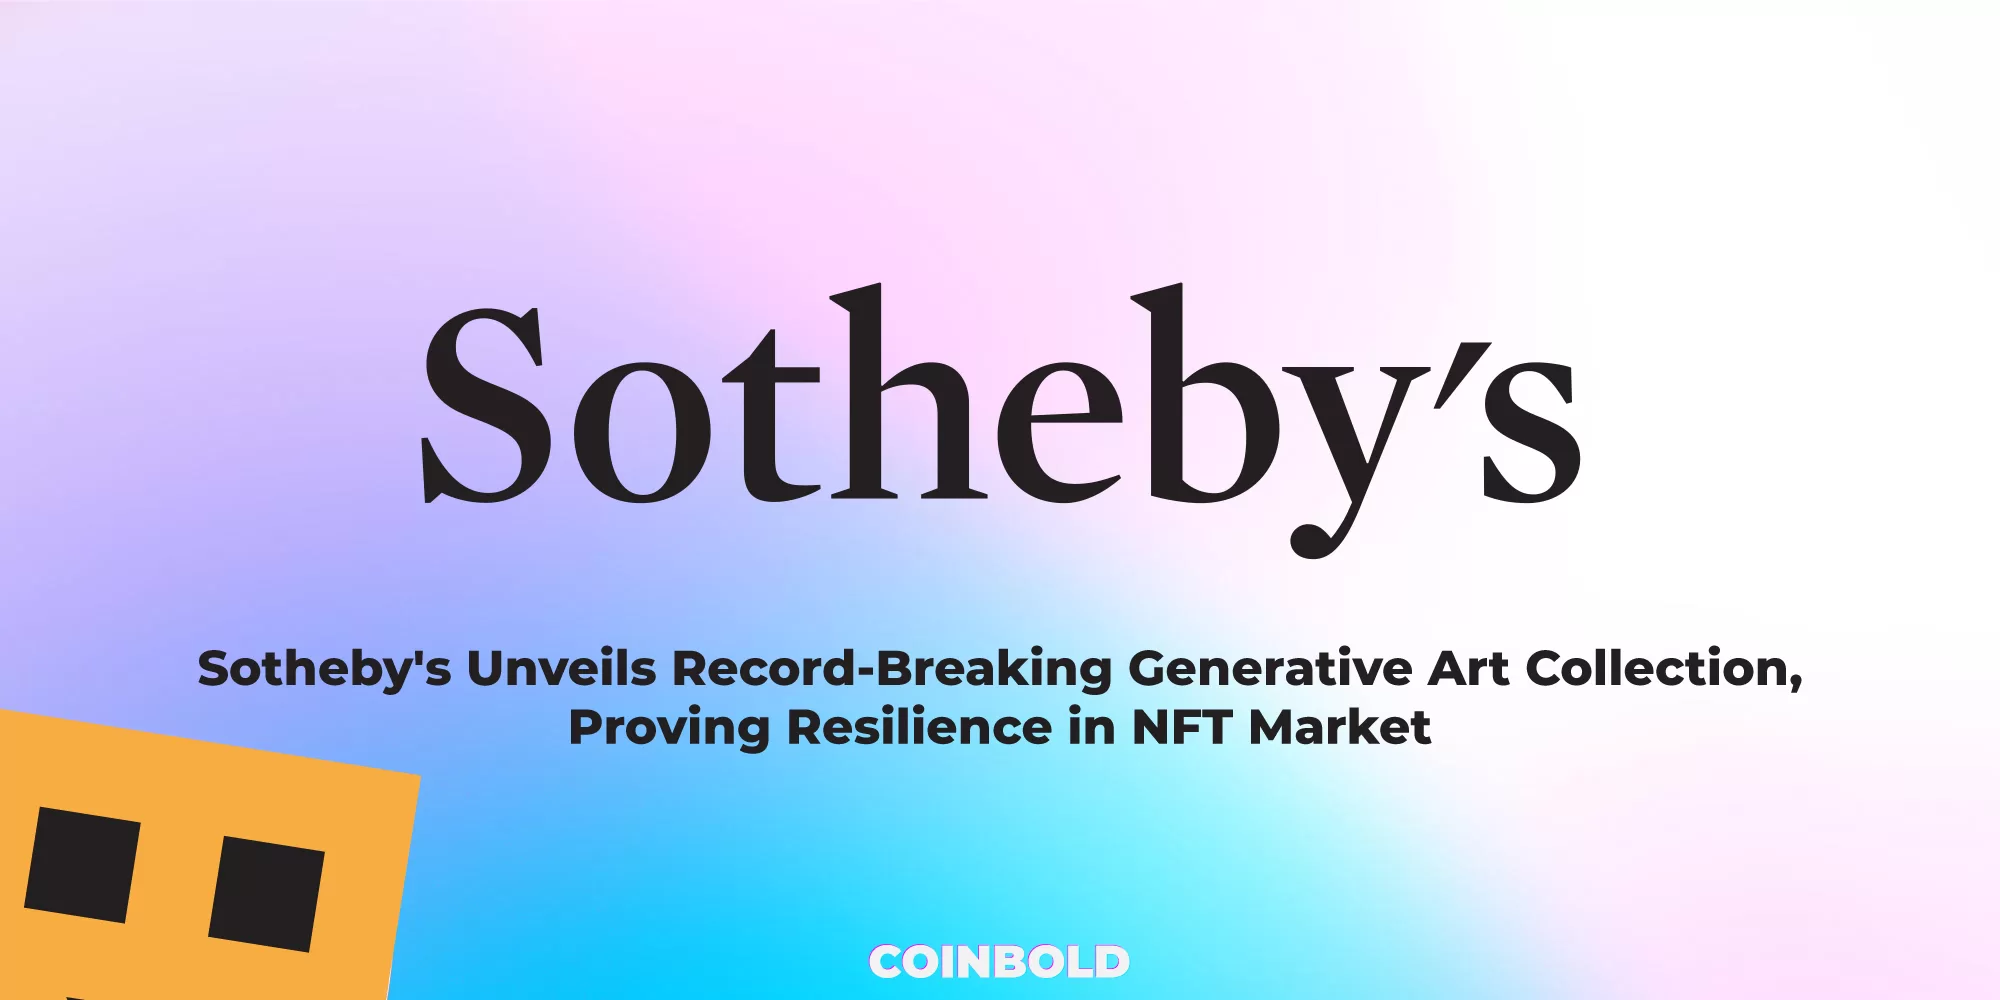 Sotheby's Unveils Record-Breaking Generative Art Collection, Proving Resilience in NFT Market